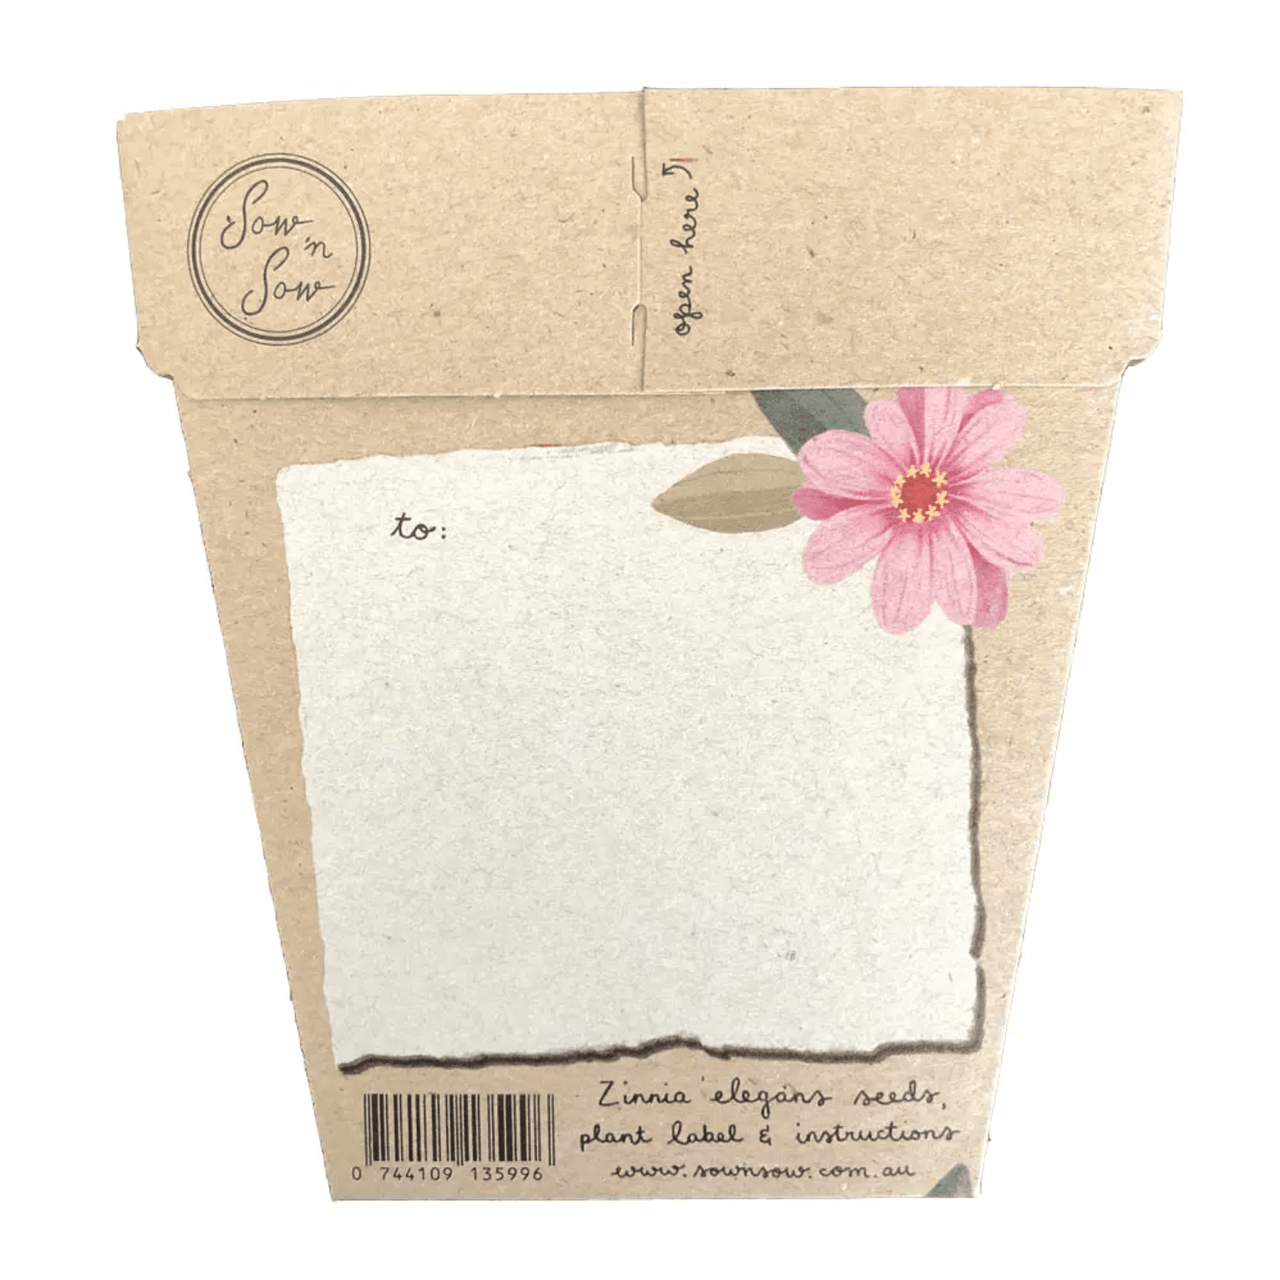 A plant pot with Seeds - 'Happy Birthday to You' Zinnia by Sow n Sow on it.